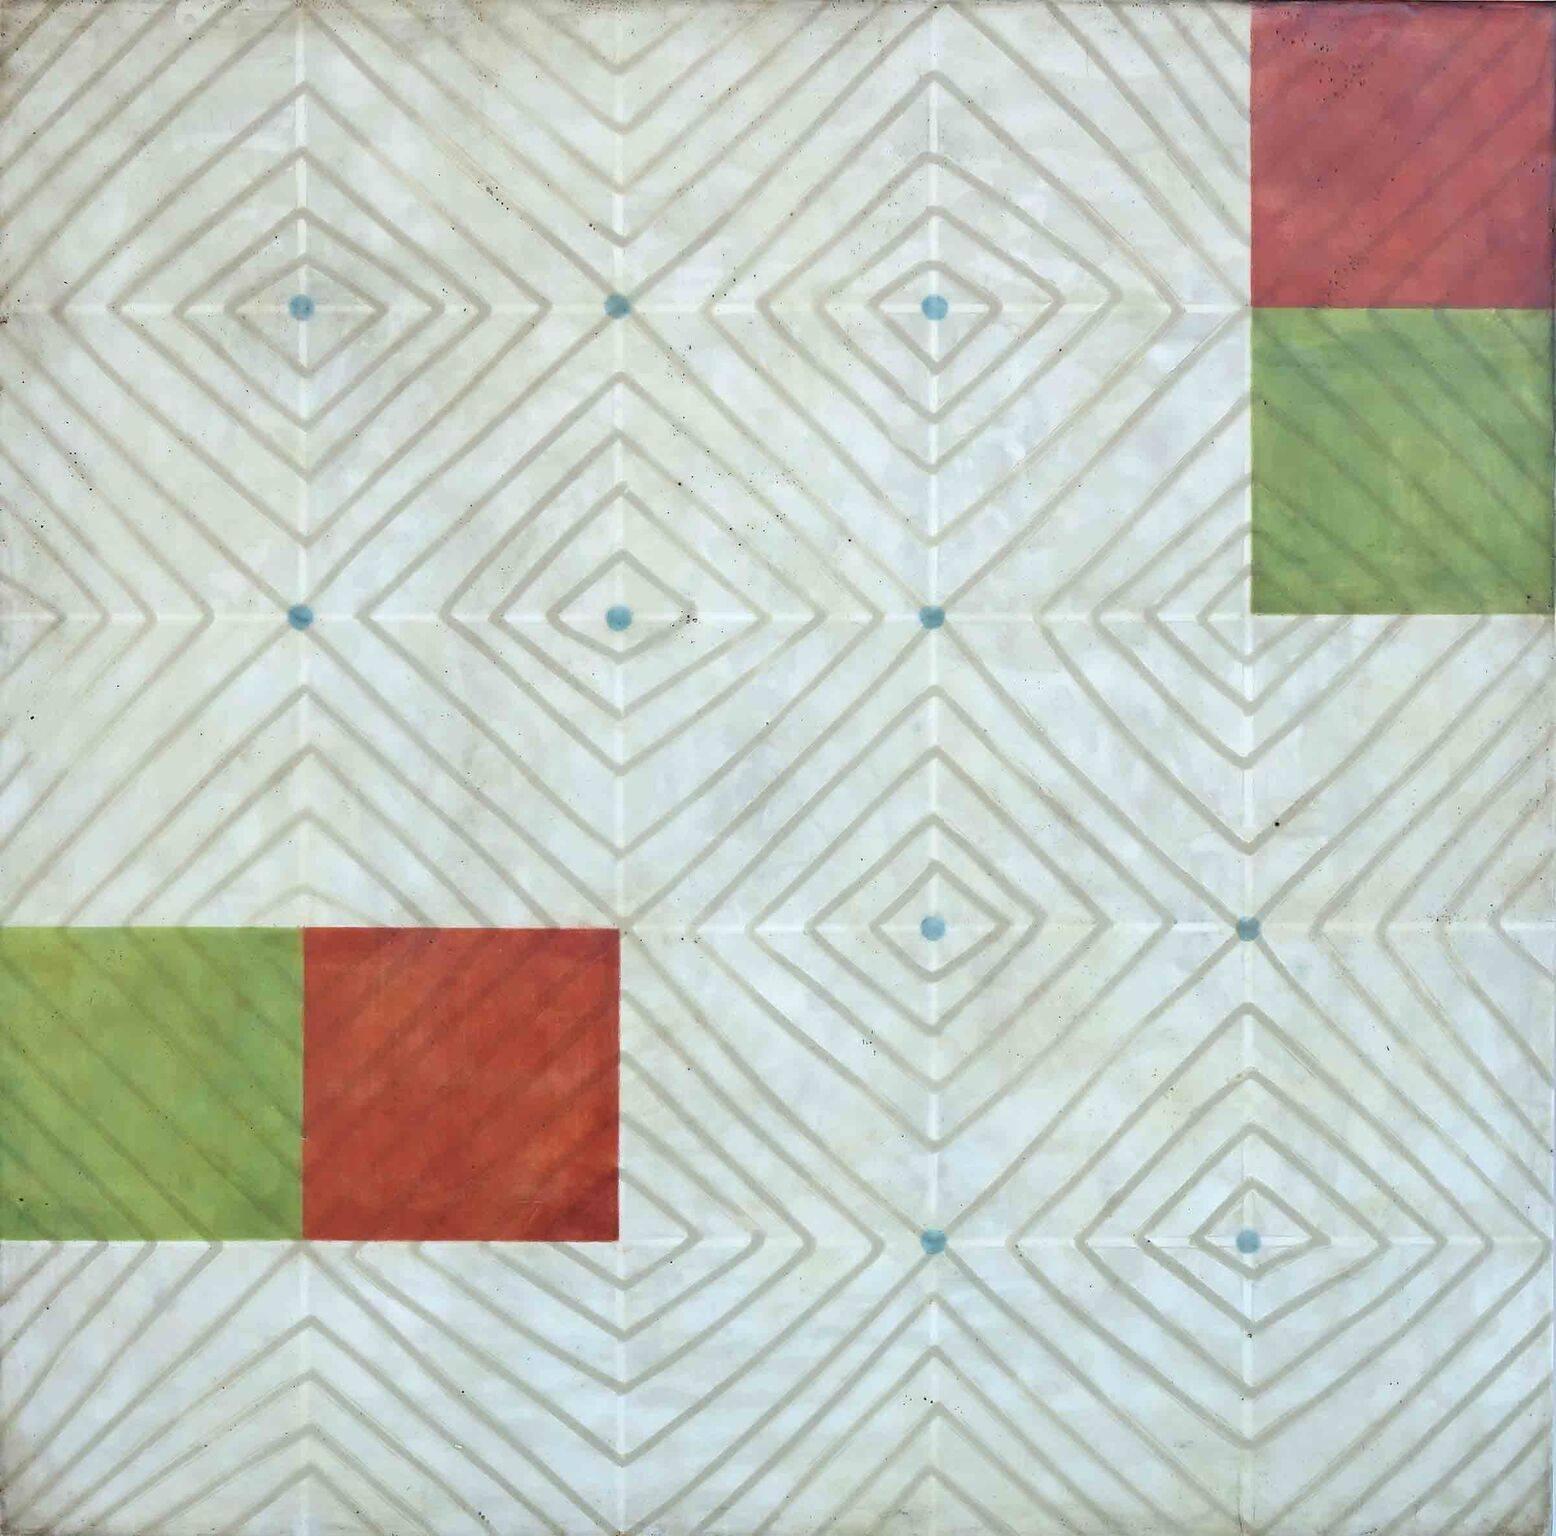 Diamonds 5 (Abstract Red, Green, Blu and White Square Encaustic Work on Panel)